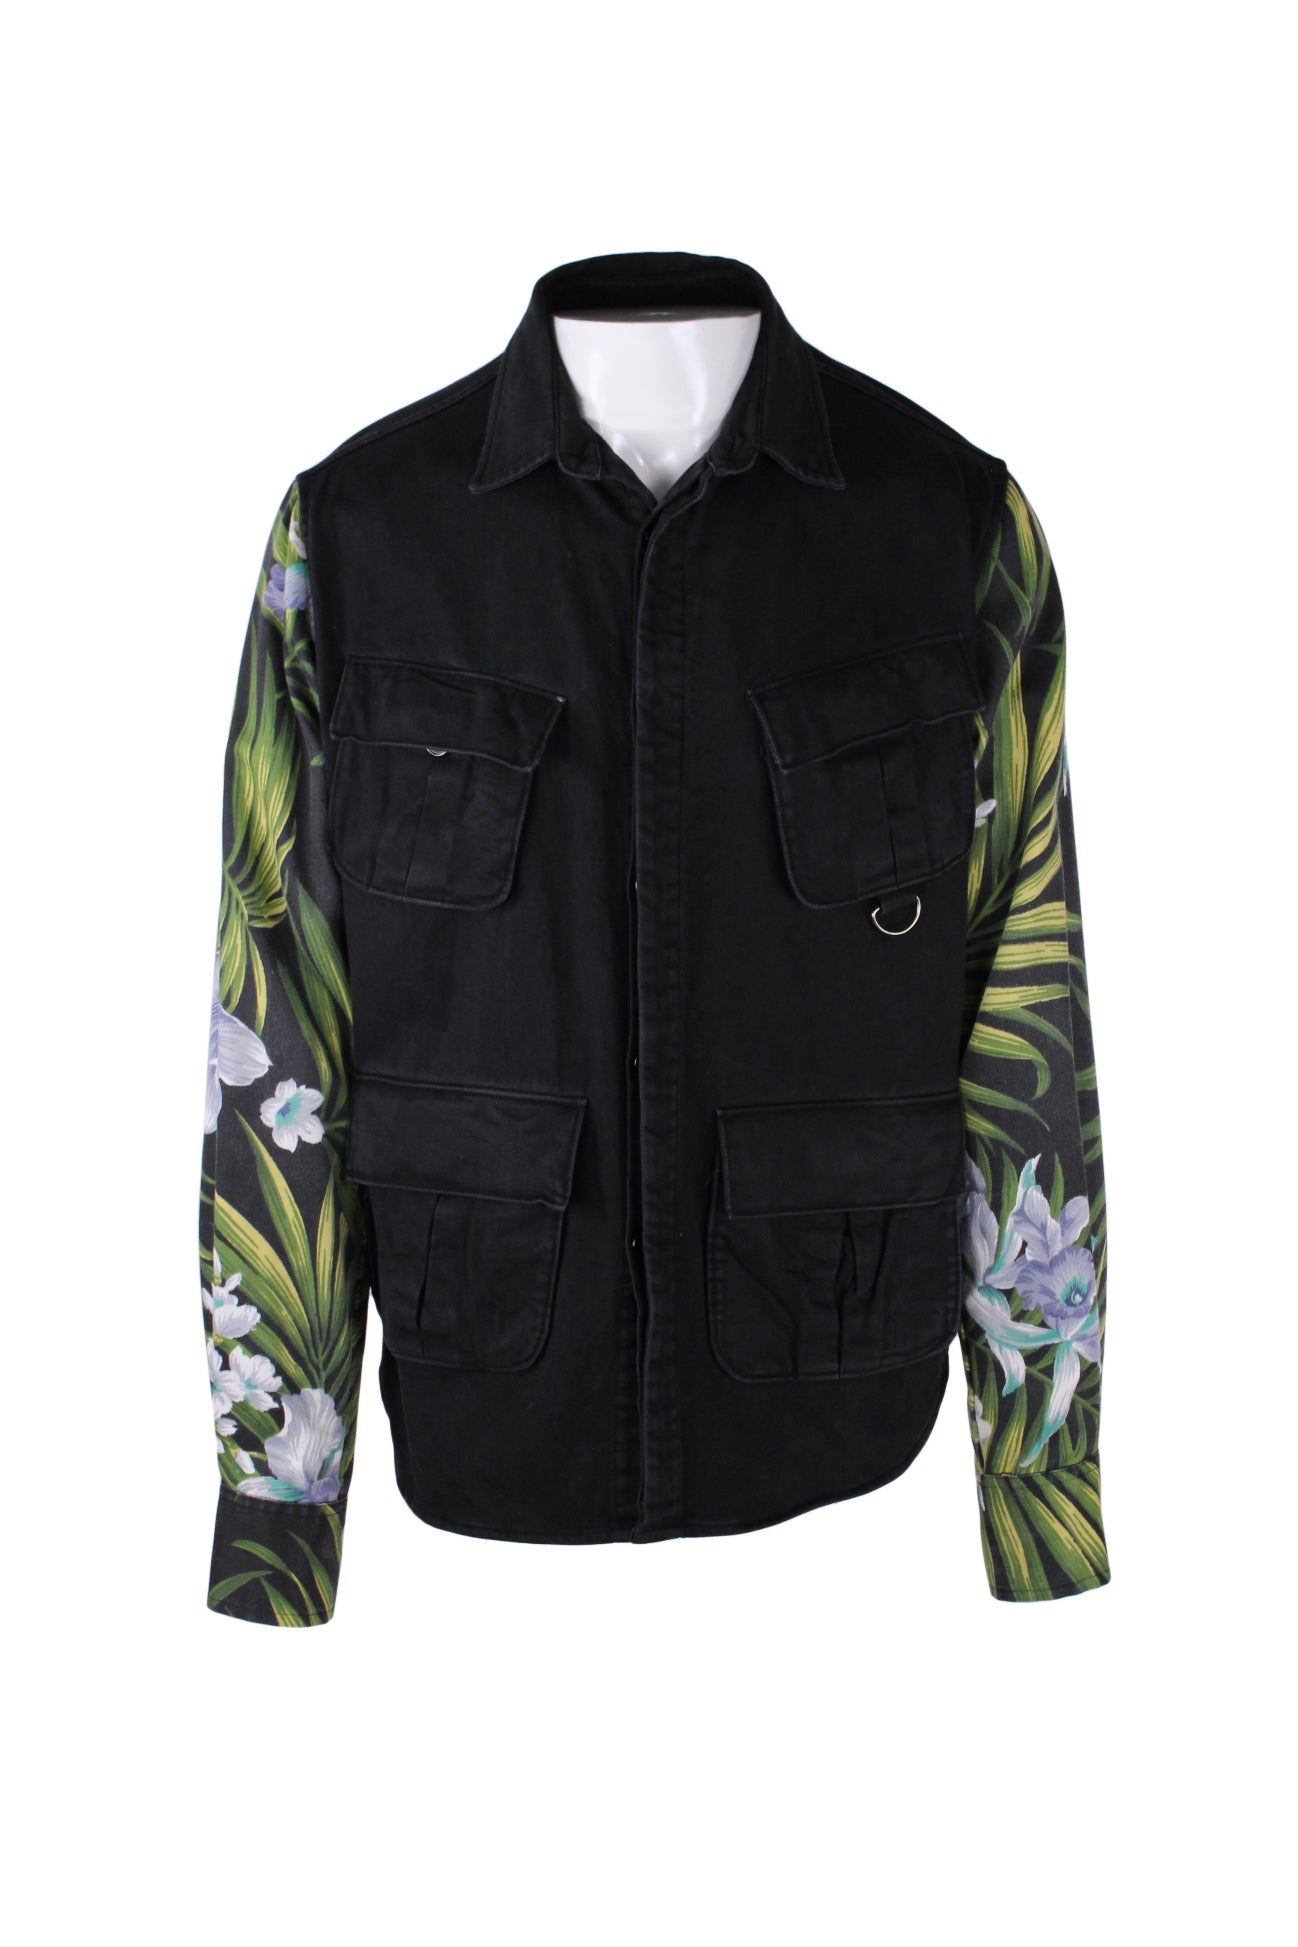 front view of kith black/green tropical button up denim jacket. features double breasted button flap pockets, front button flap pockets above hem, and tropical pattern sleeve with buttons at cuffs.